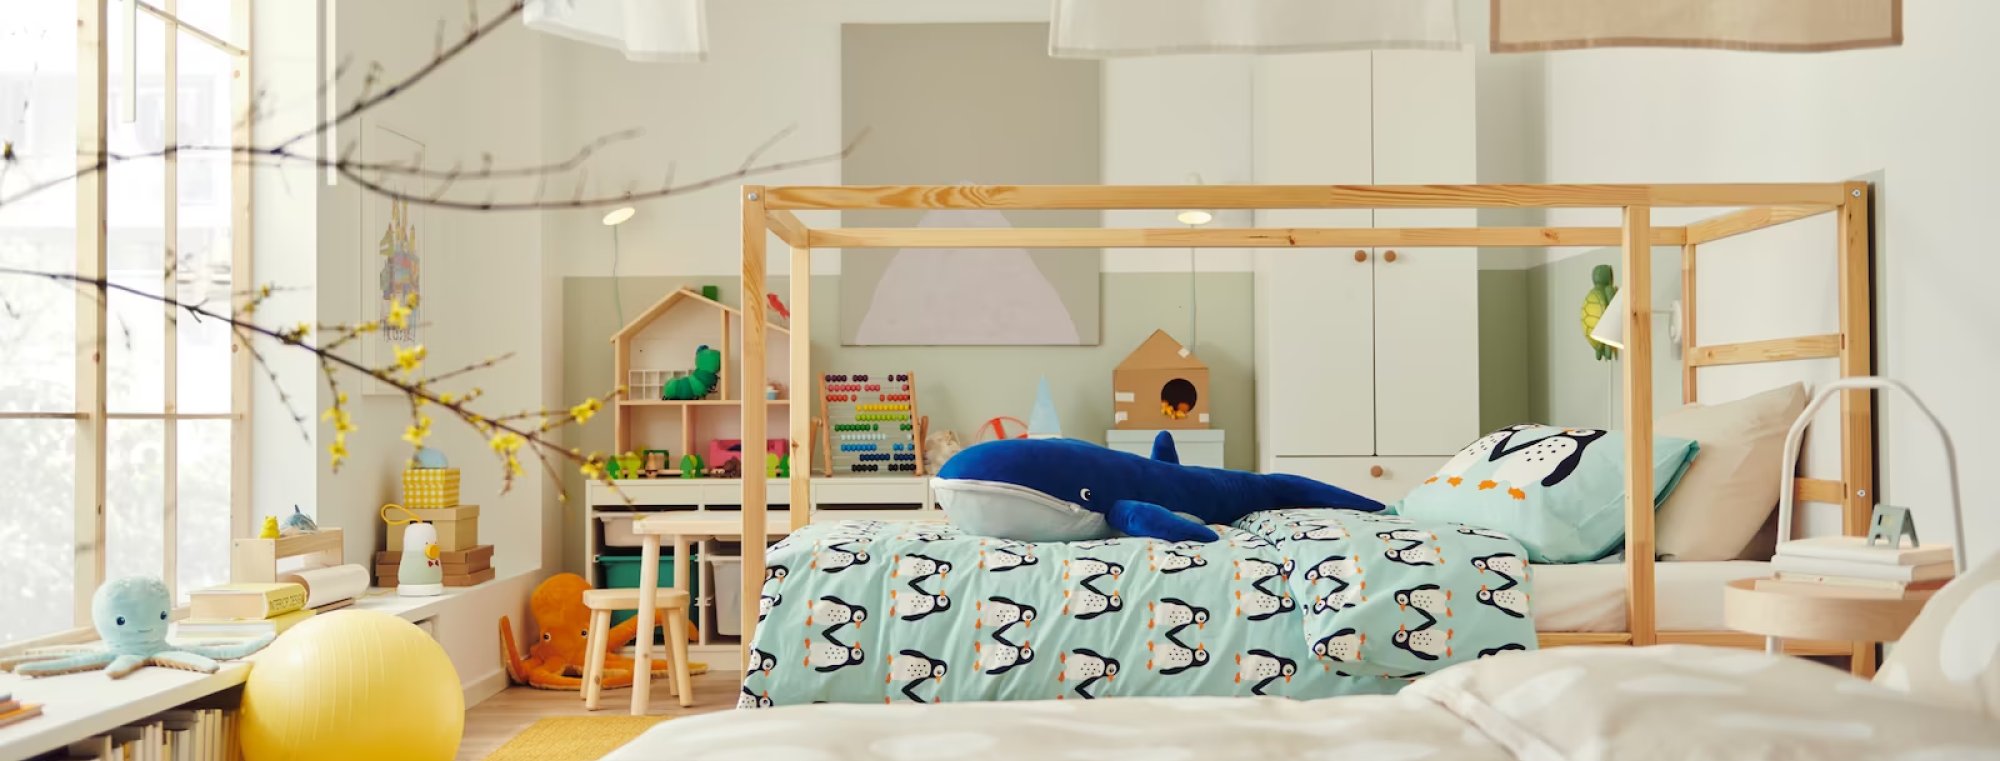 A kids bedroom with a bed, storage and more furniture